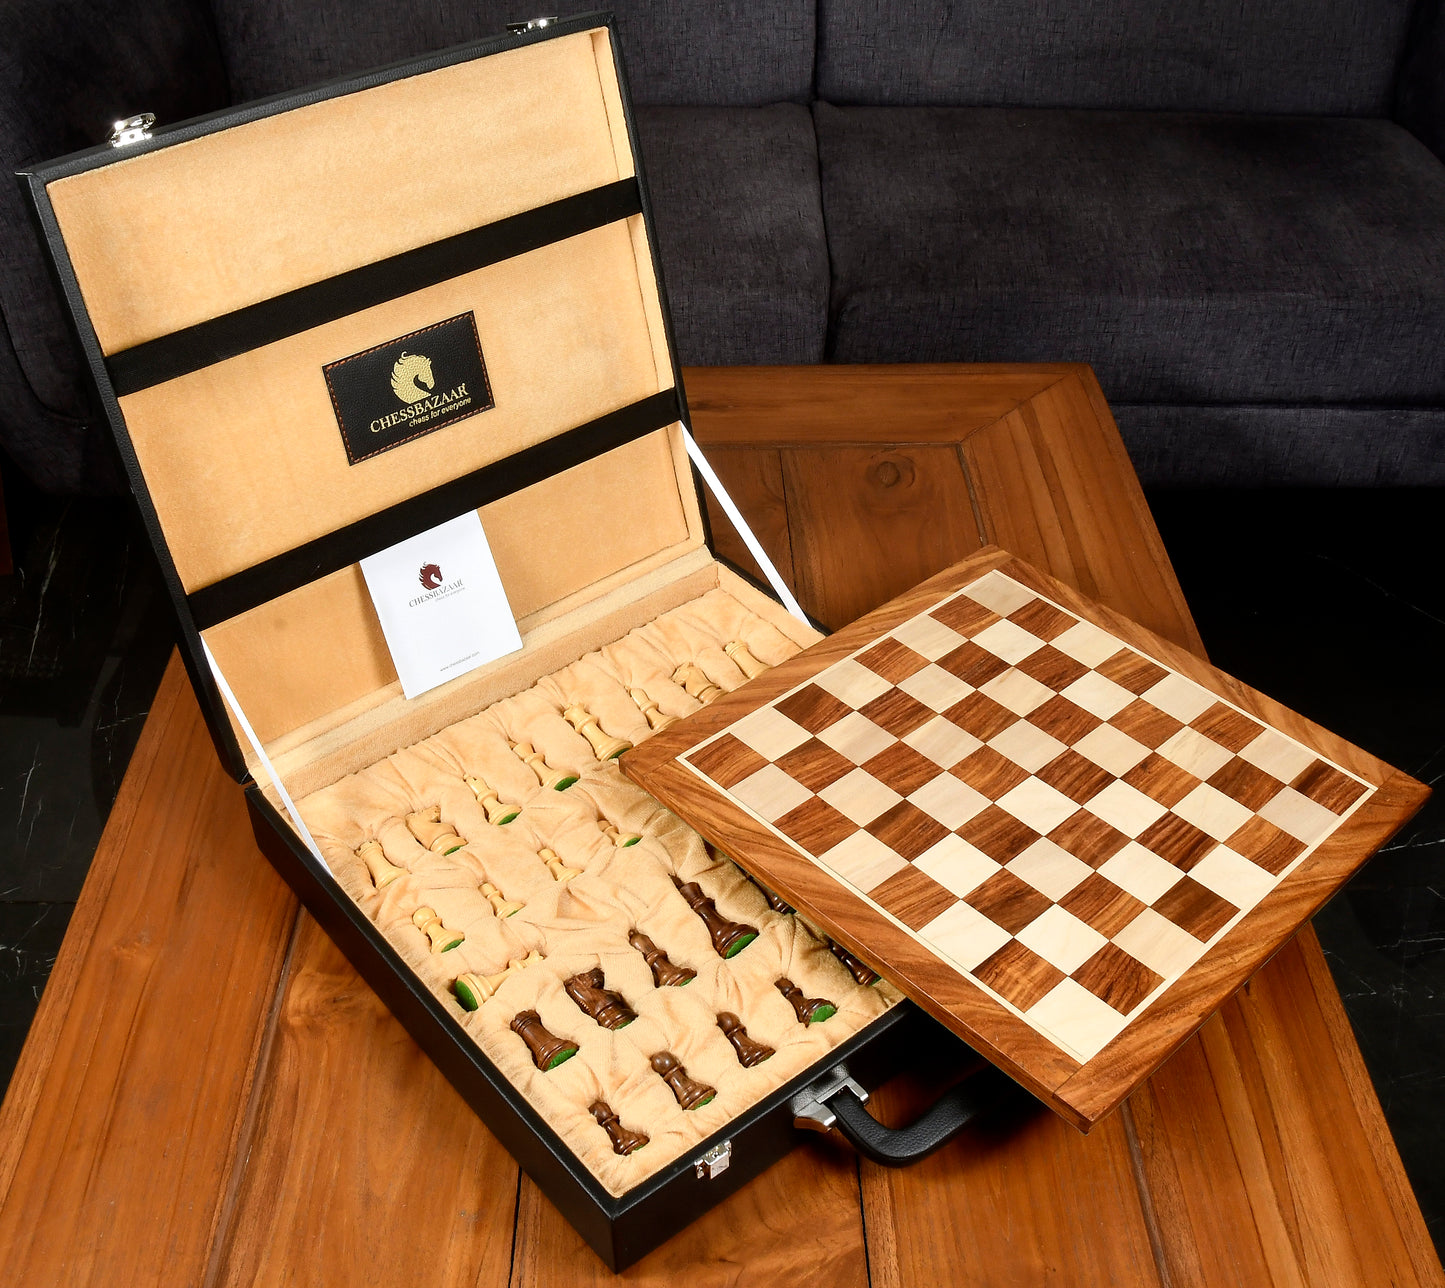 Combo The collector Wooden Staunton Chess Set in Sheesham & Boxwood Pieces, Wooden Chessboard and Coffer Storage Box -2.8" King